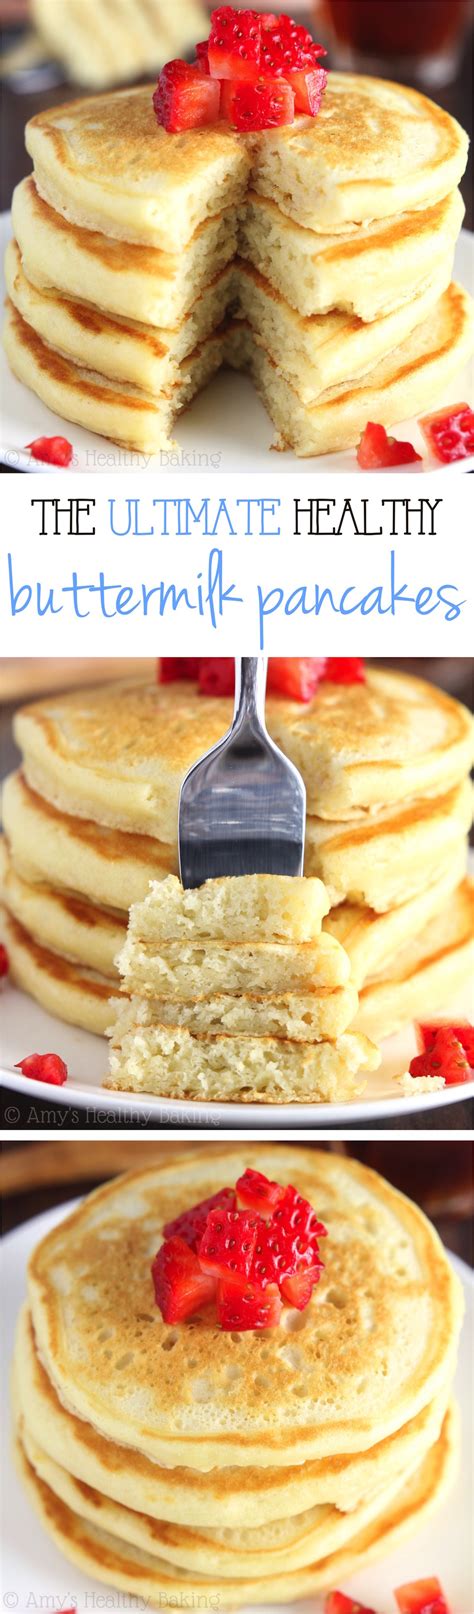 The Ultimate Healthy Buttermilk Pancakes Amys Healthy